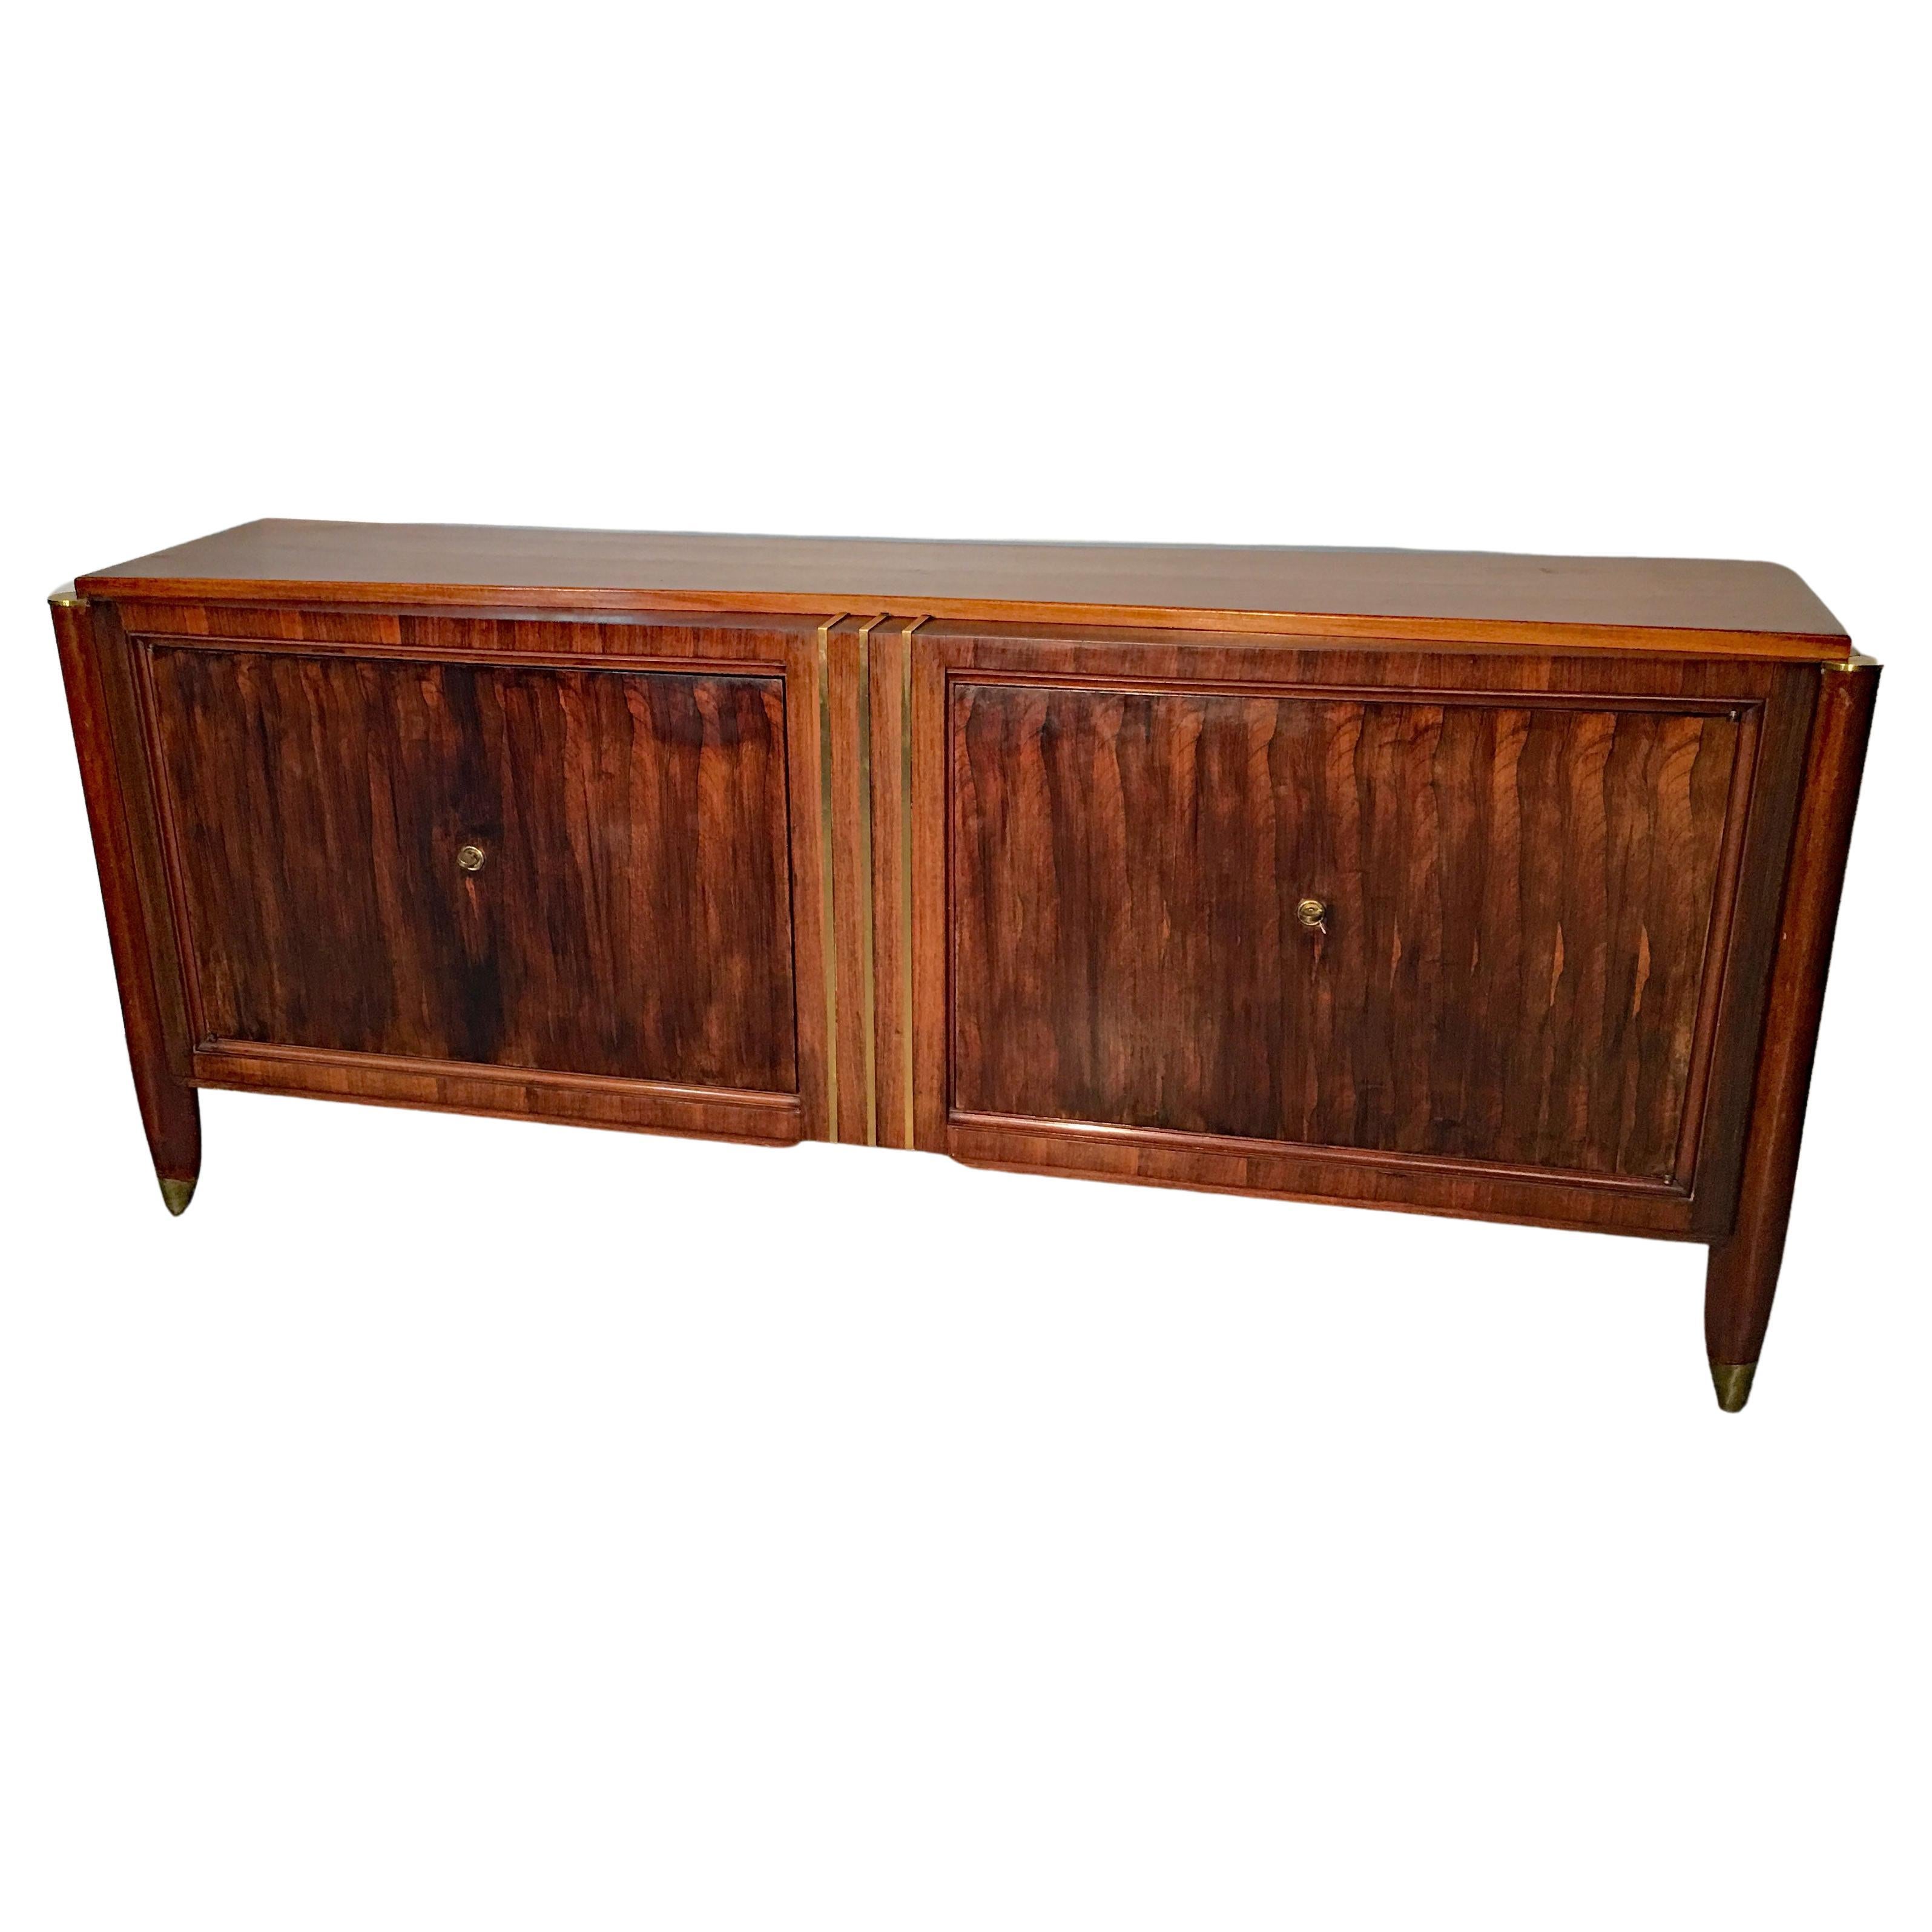 Art Deco sideboard in walnut and bronze in the style of Dominique.
Interior in sycamore,
circa 1930.
Need a new polish.
 